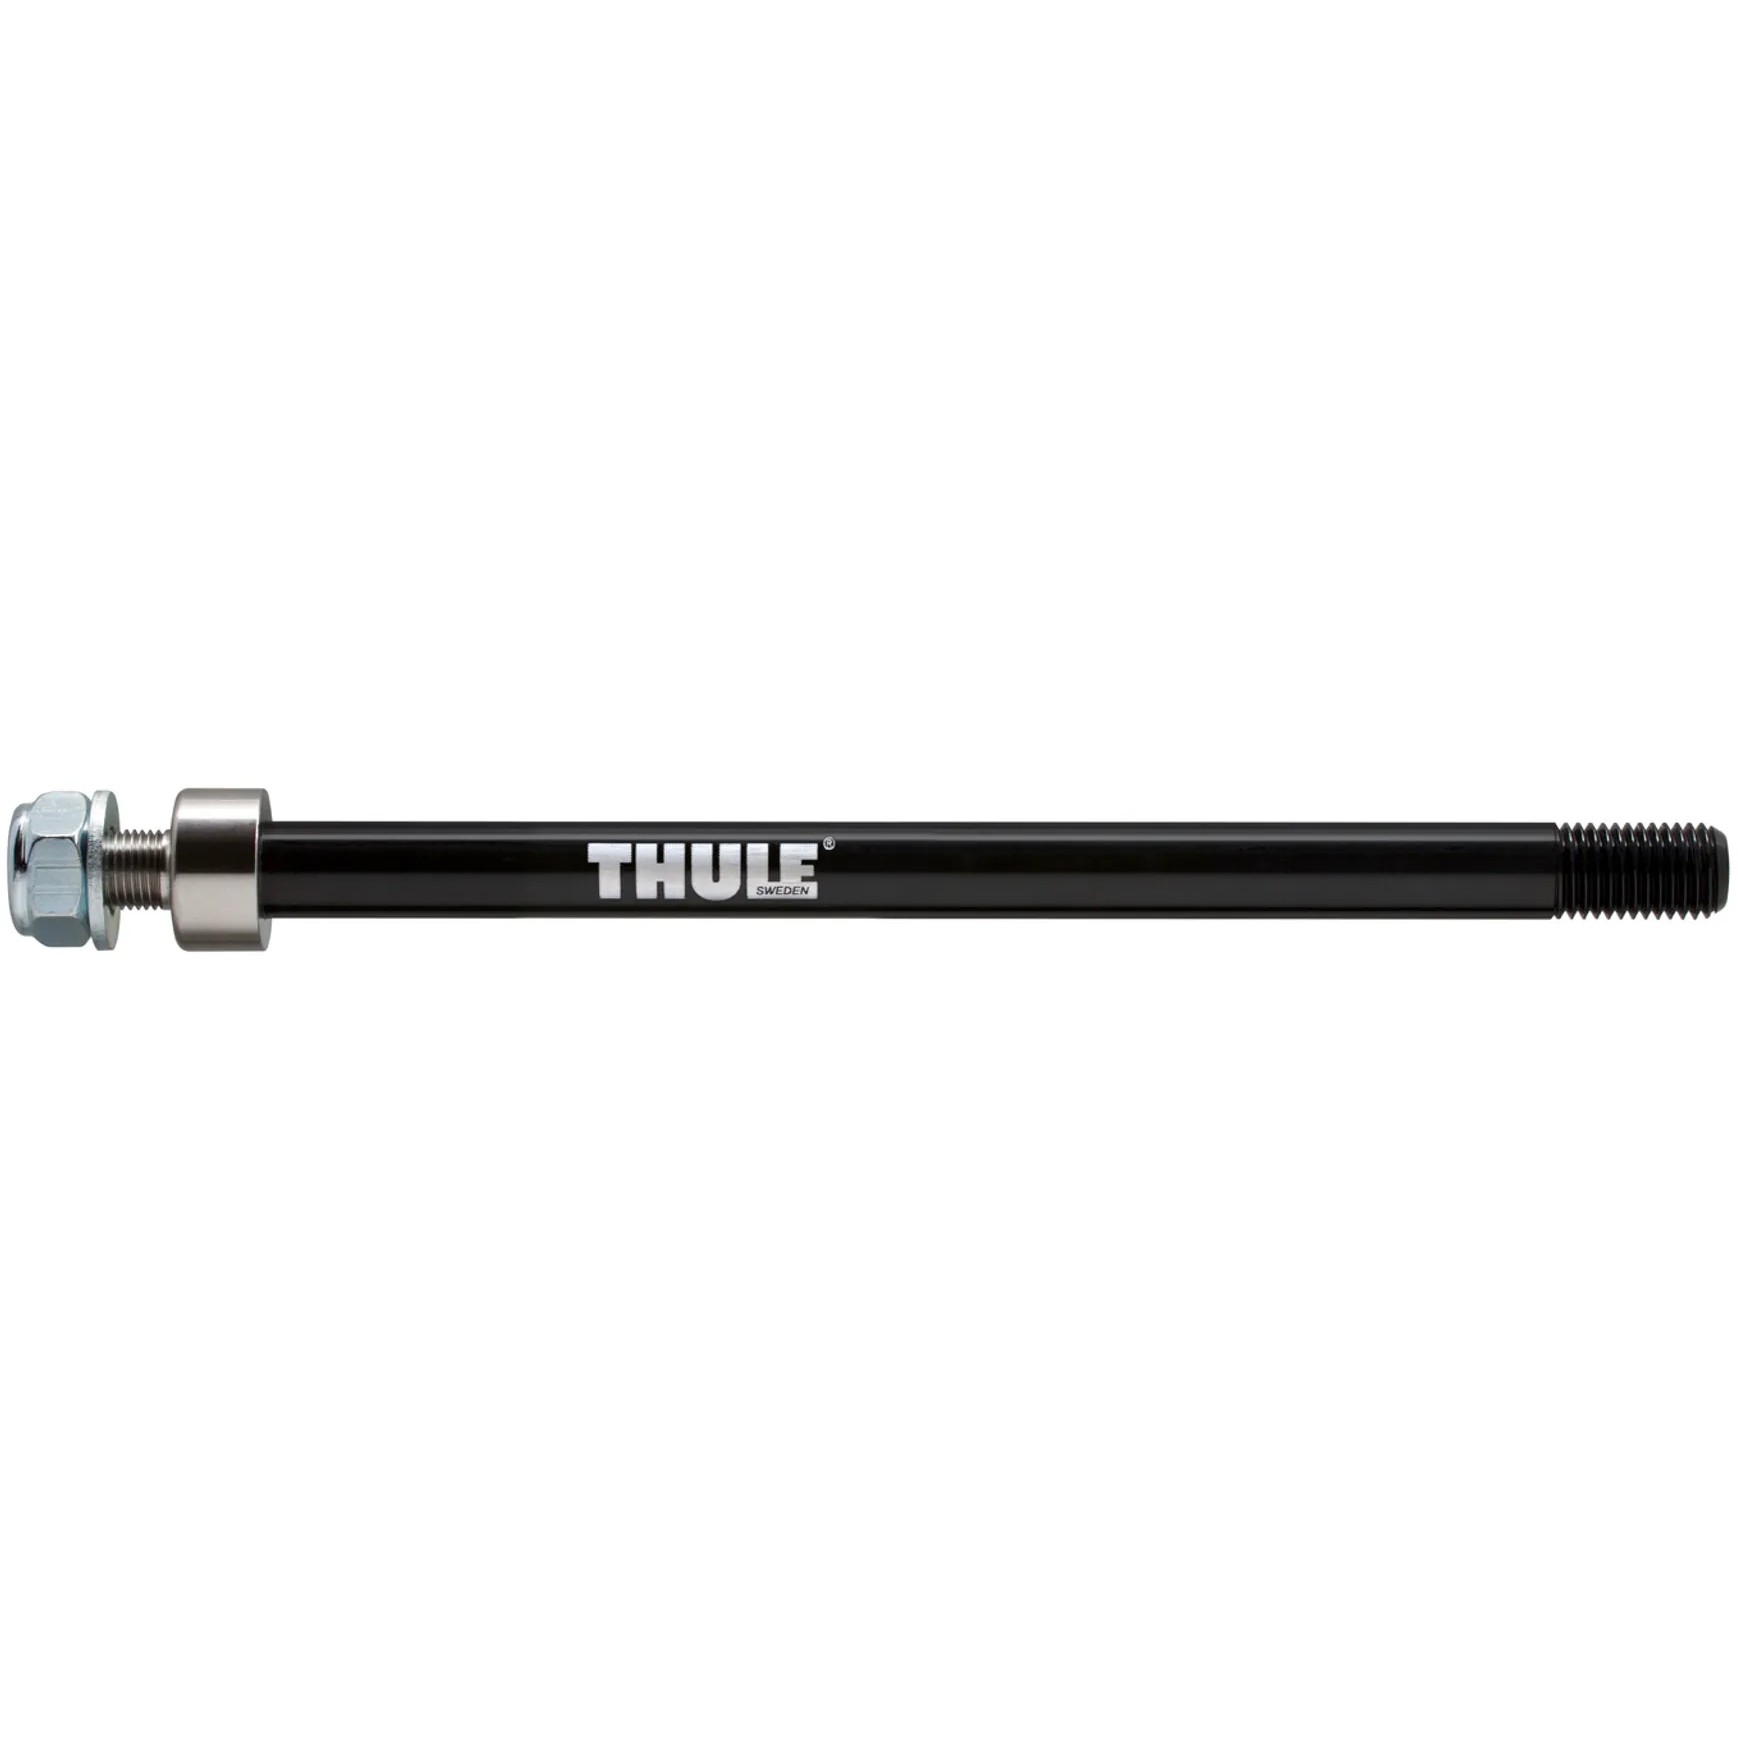 Image of Thule Thru Axle Syntace M12 x 1.0 - 169-184mm - black